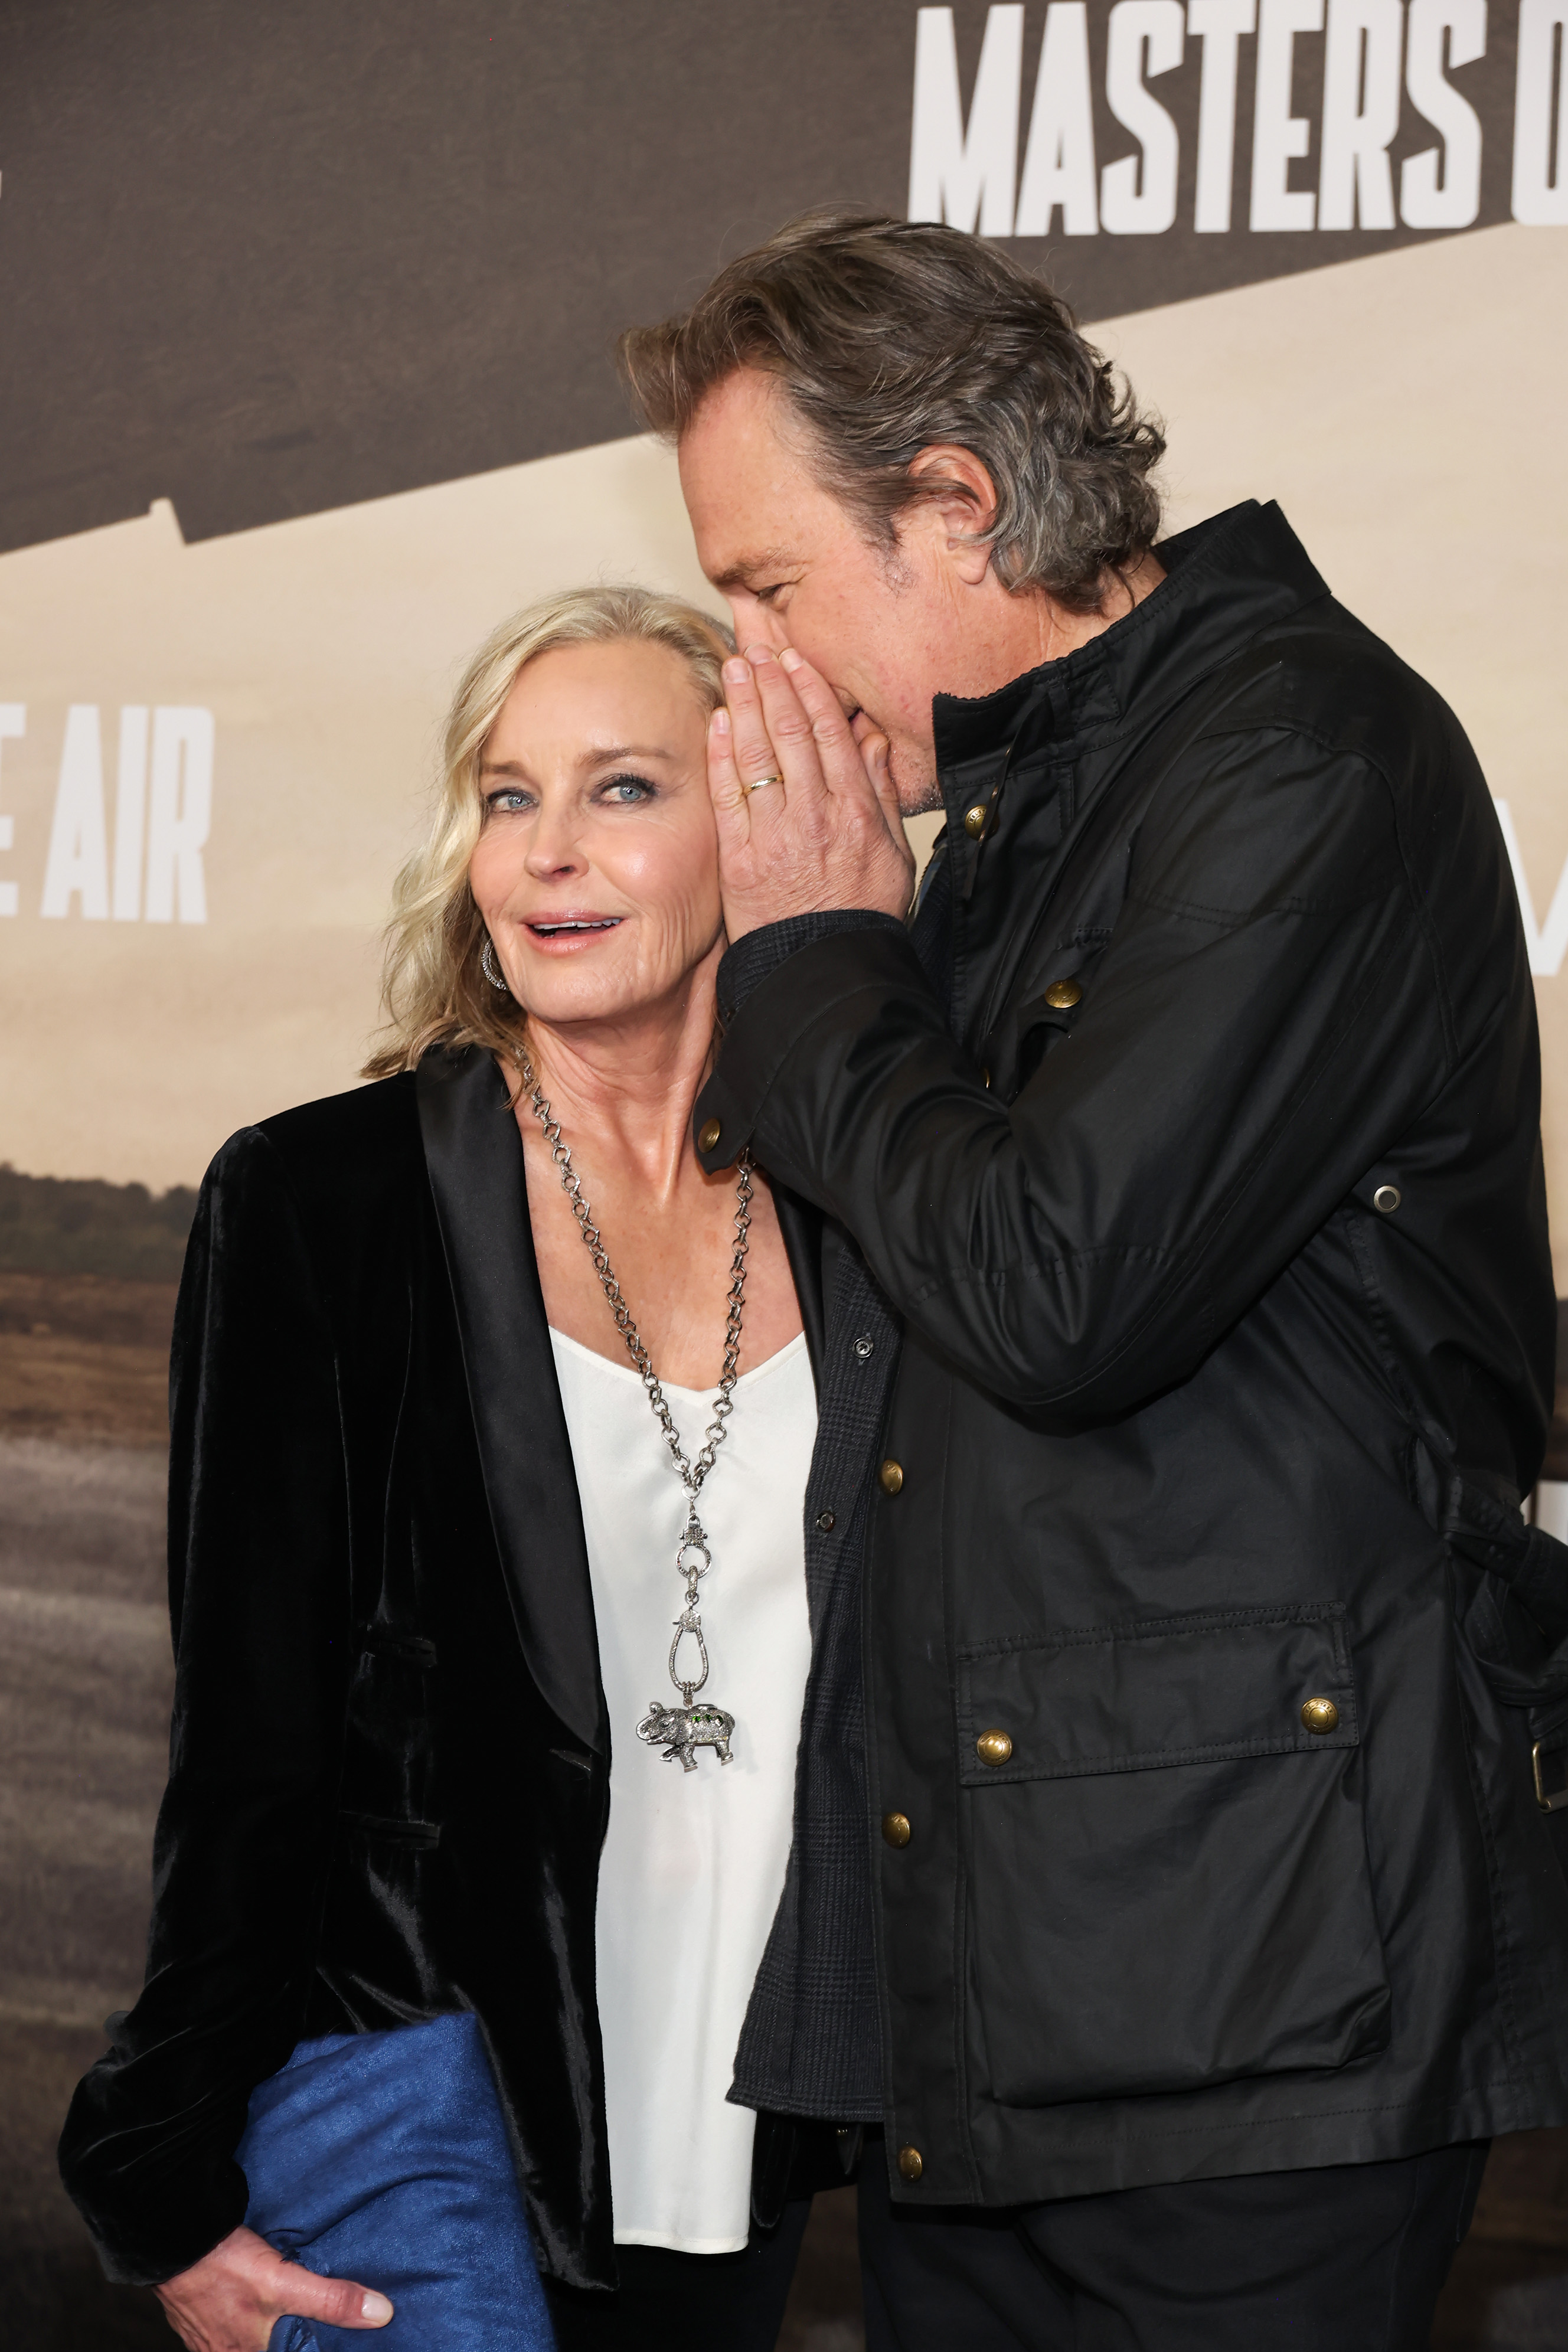 Bo Derek and John Corbett at the "Masters of Air" LA premiere in January 2024 | Source: Getty Images